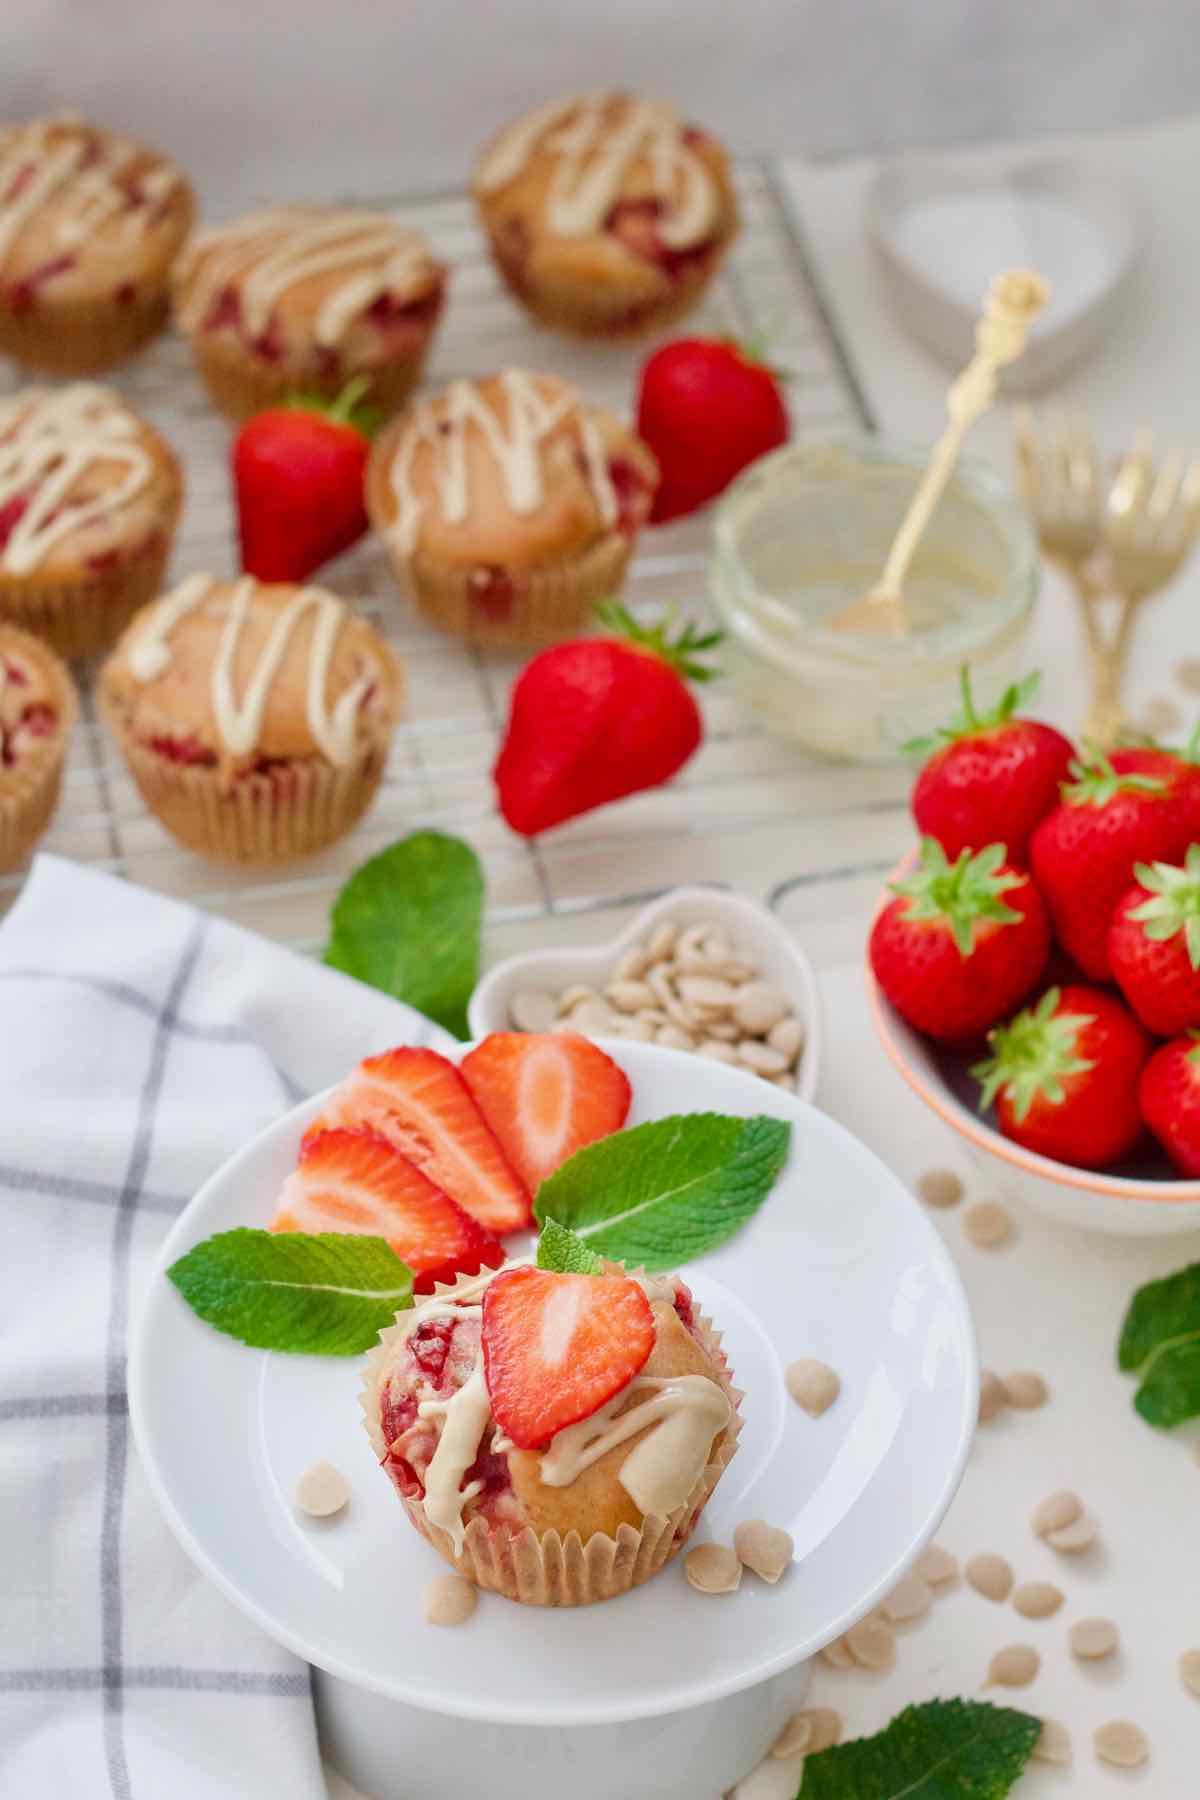 Decorated vegan strawberry muffin on a plate with more muffins in the background.